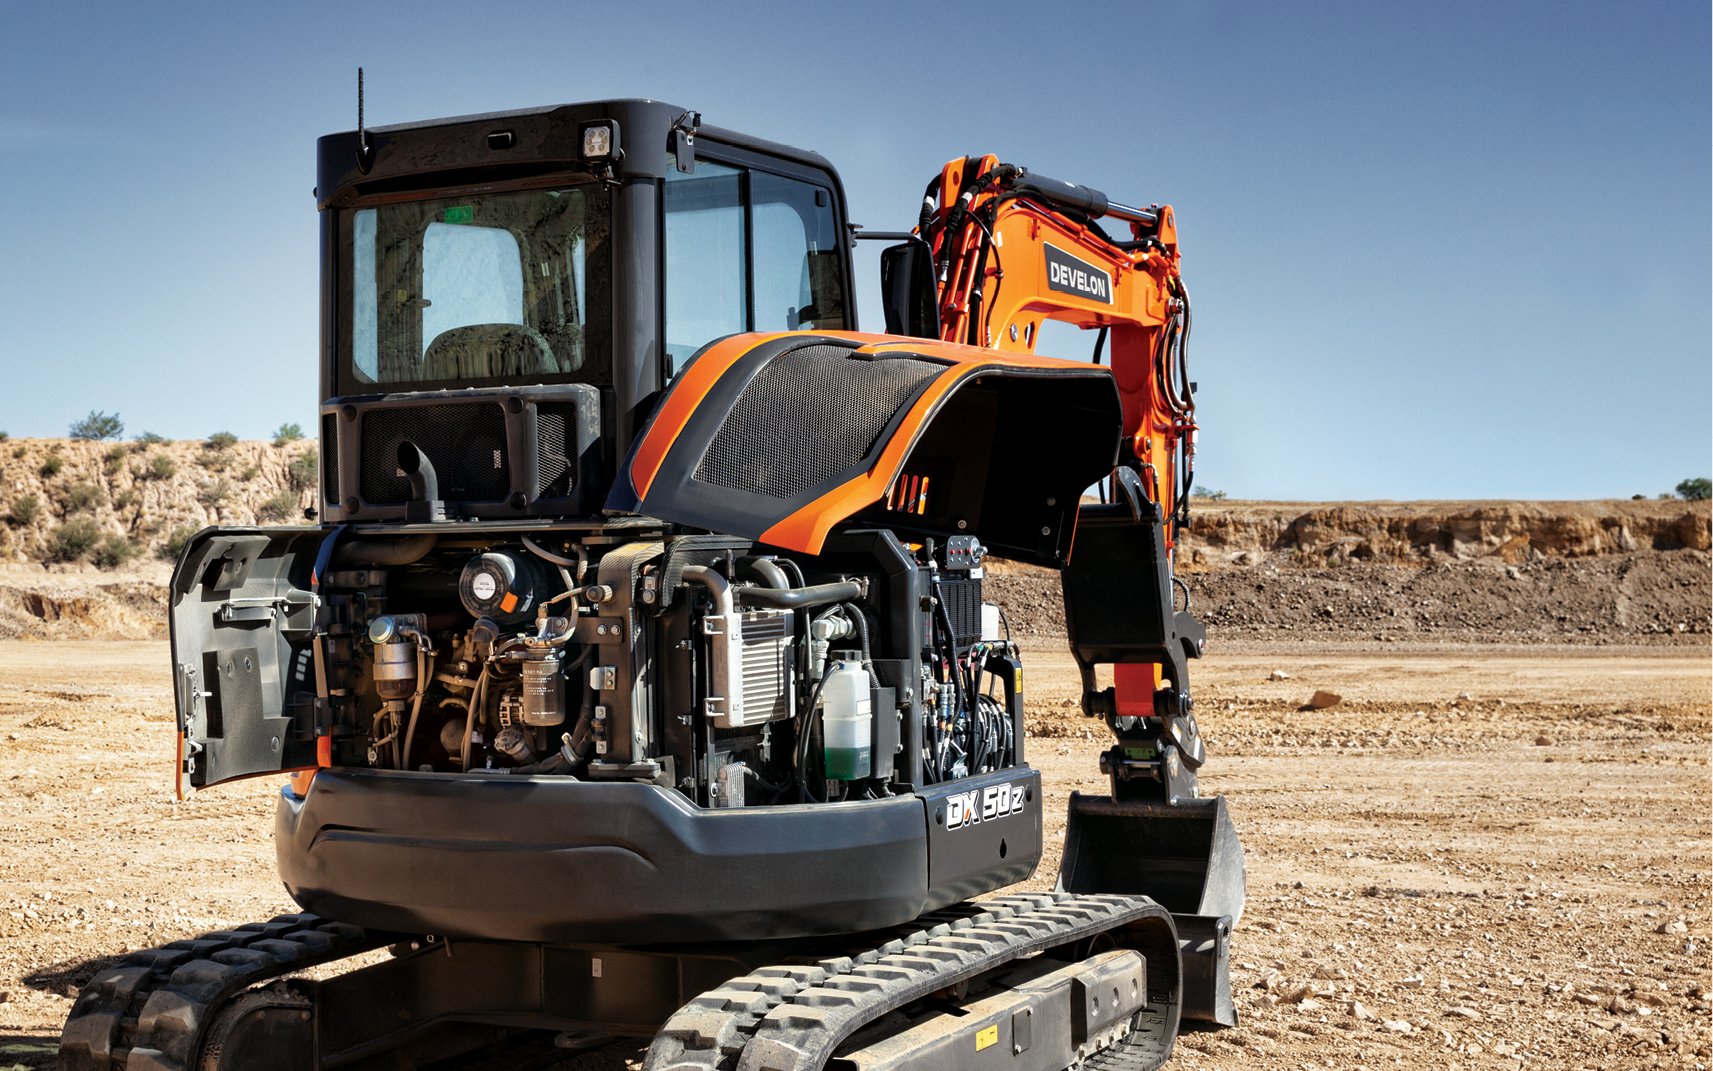 A DX50Z-7 mini excavator with panels open for inspecting internal components.